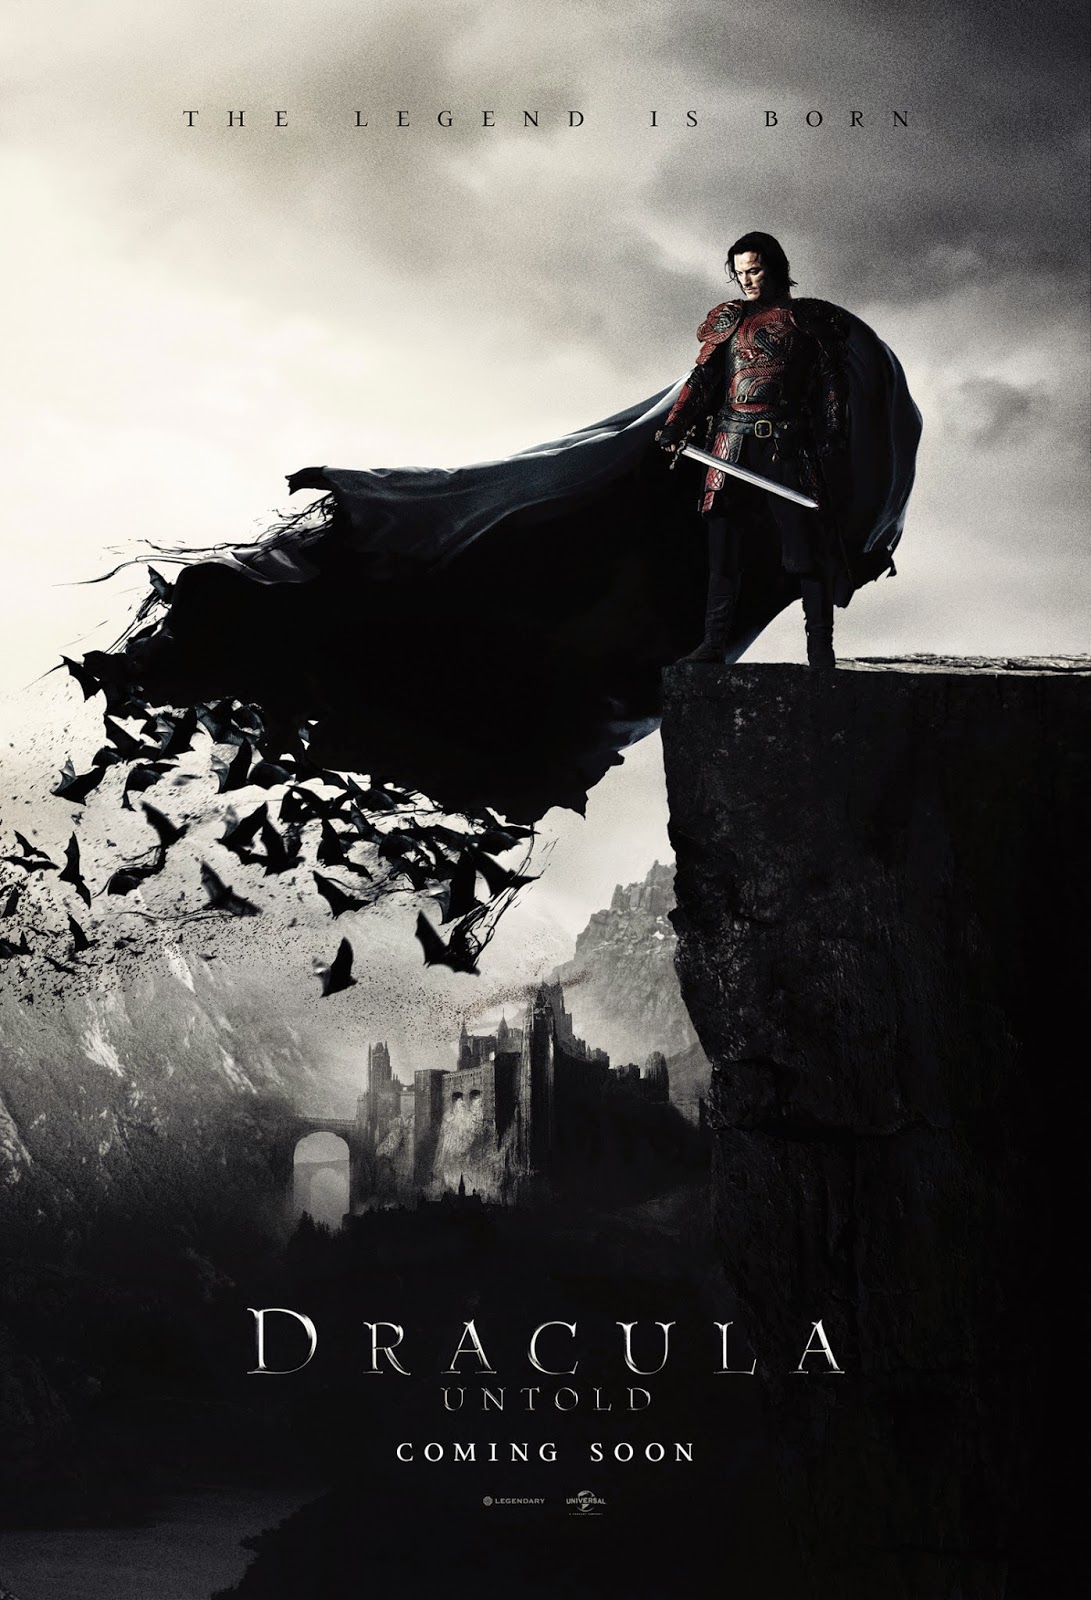 Maximum Extreme - The Ultimate Movie And Lifestyle Website: Dracula Untold Movie Review!!!